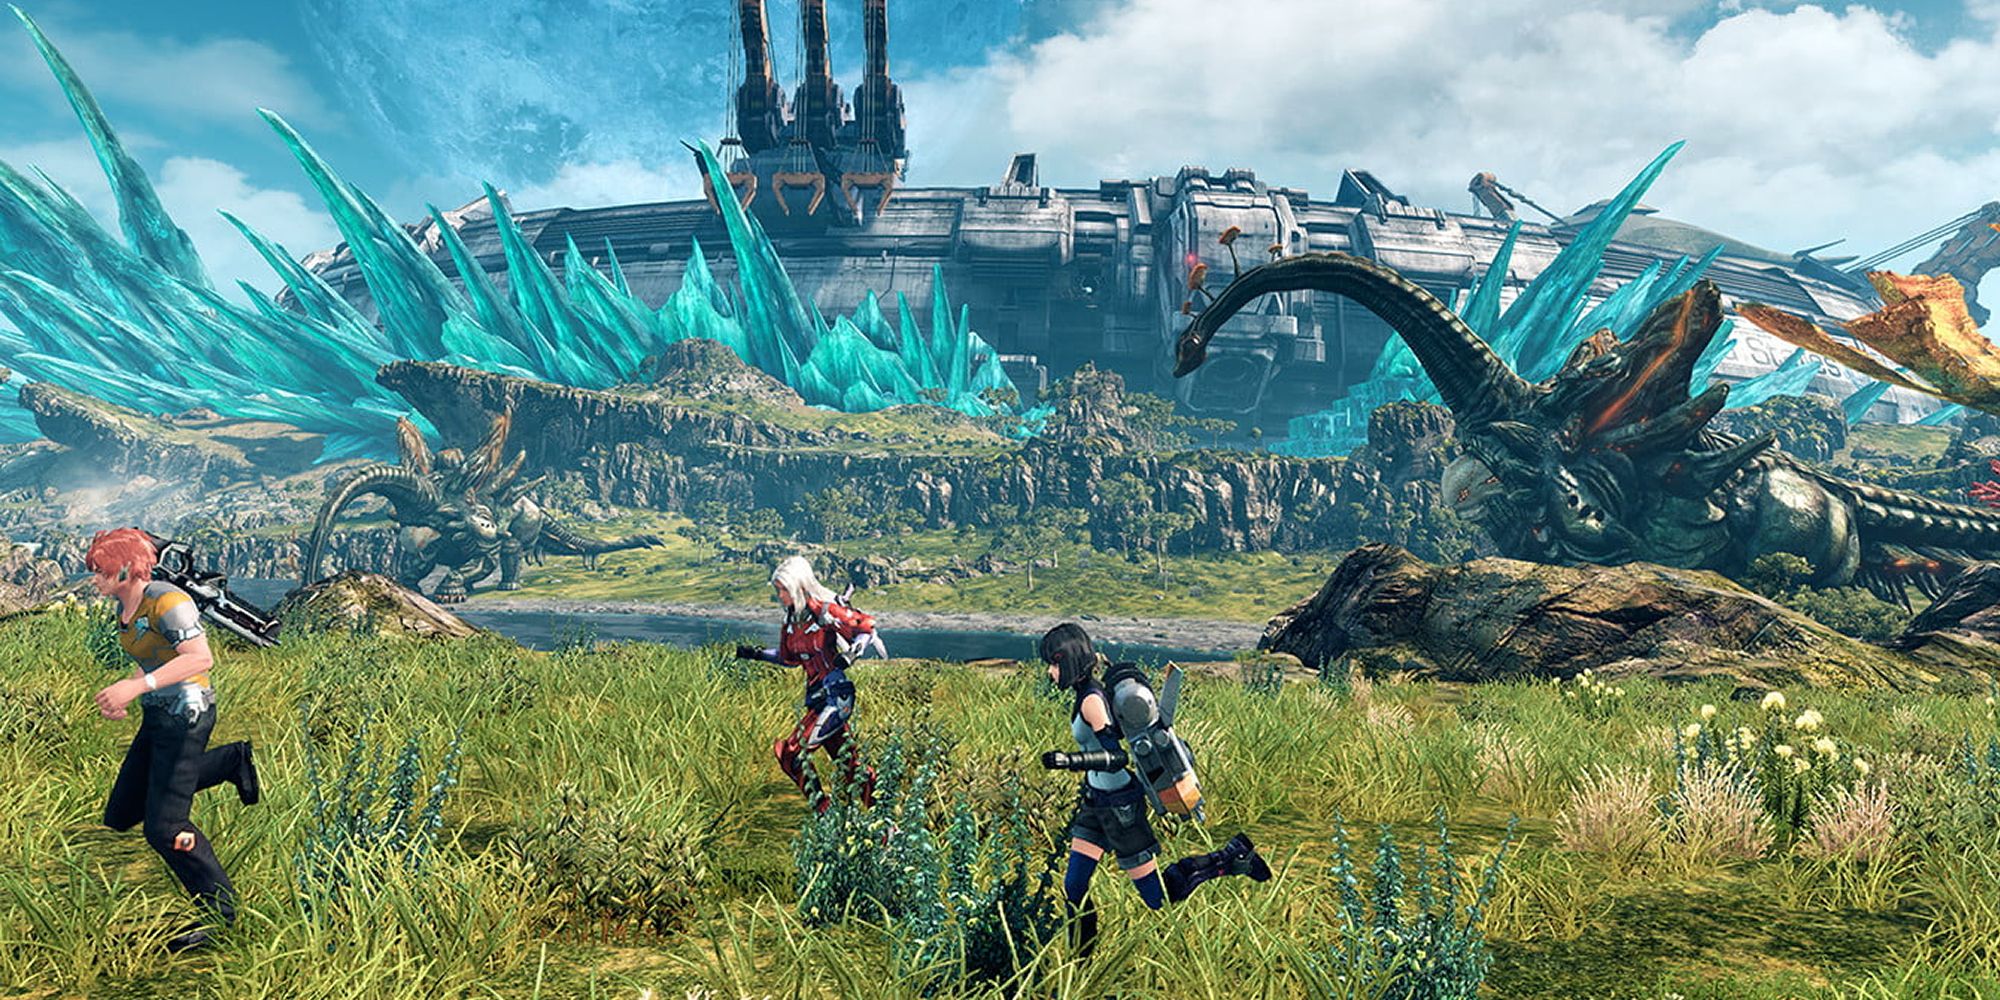 Xenoblade Team Runs Across The Field with large blue crystalline structures in the background and some creatures.  